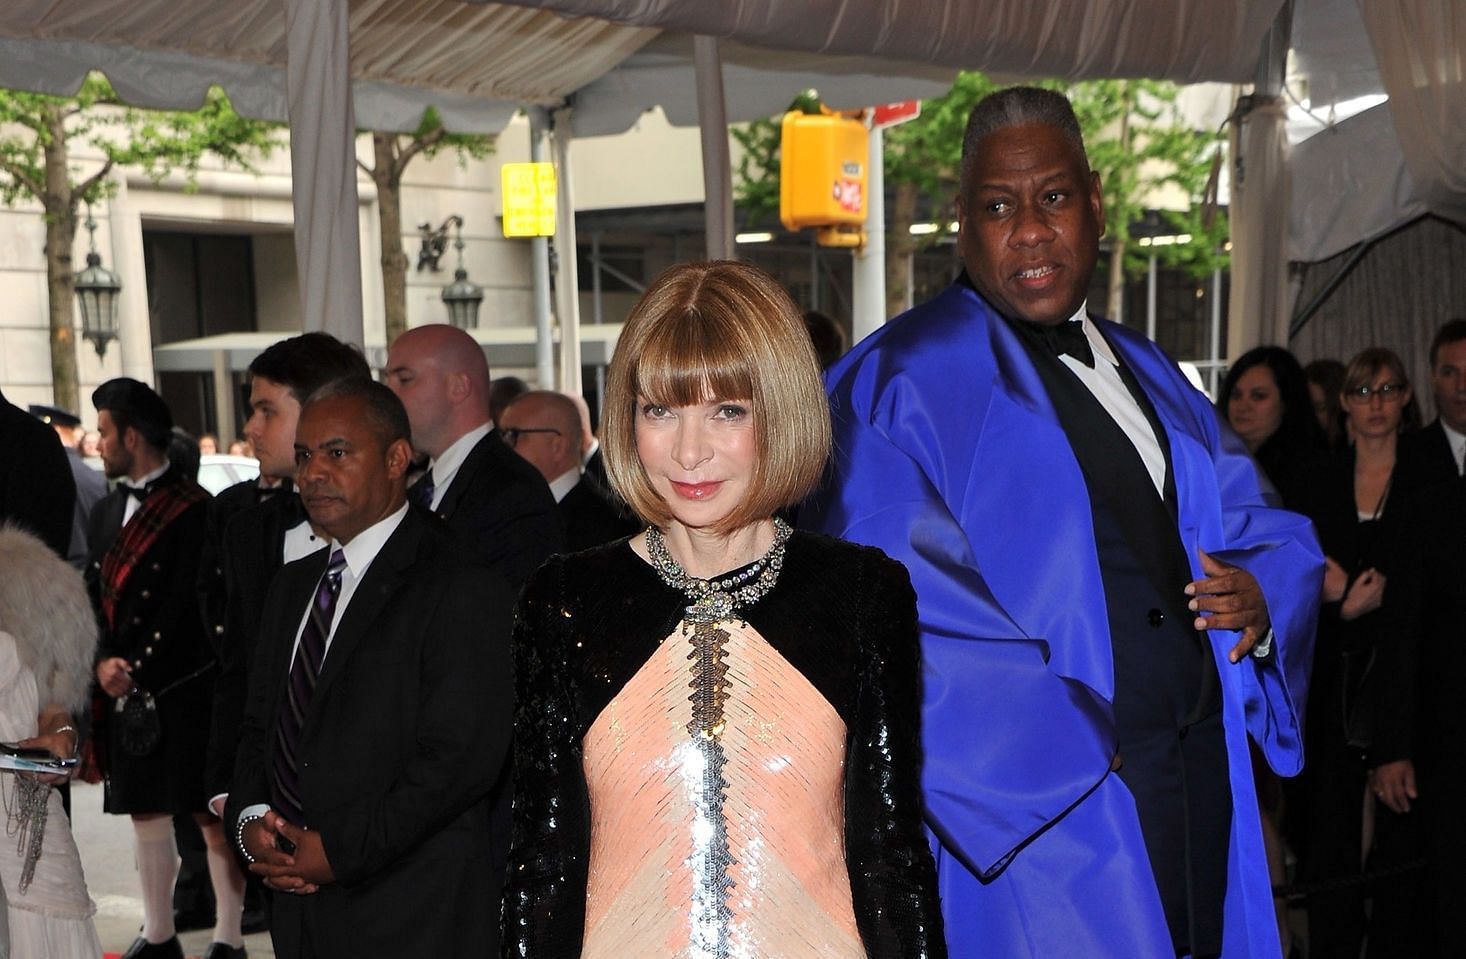 Andre Leon Talley and Anna Wintour at the MET Museum in 2011 (Image via Stephen Lovekin/Getty Images)